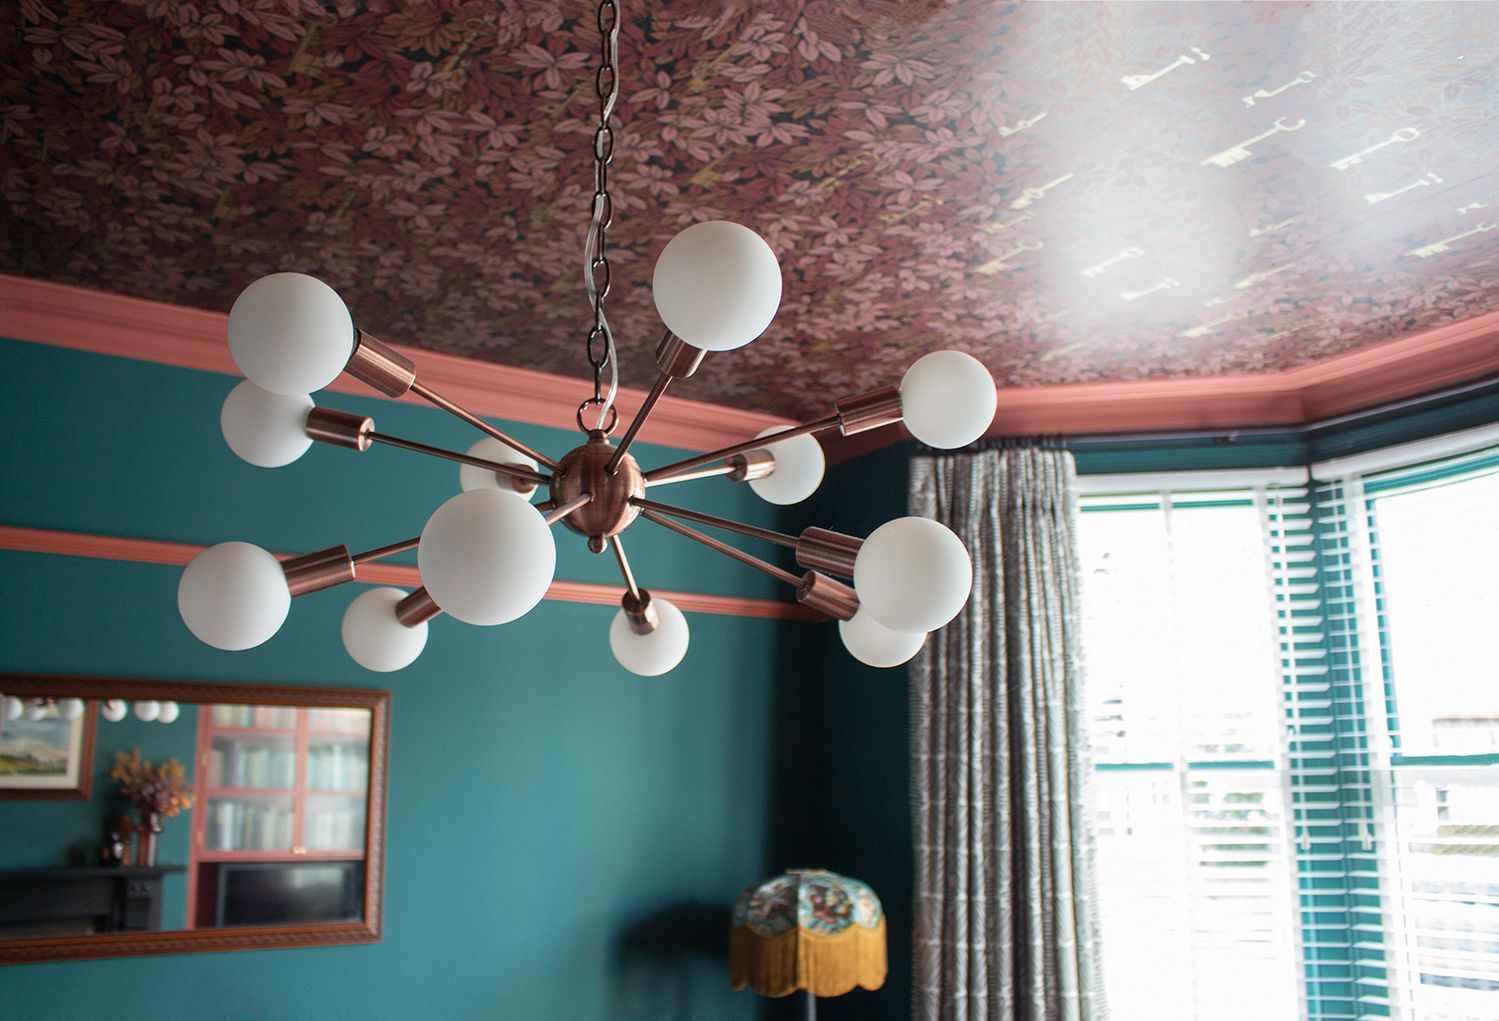 A photo showing the sputnik ceiling light with white globe bulbs, with the wallpapered ceiling above.